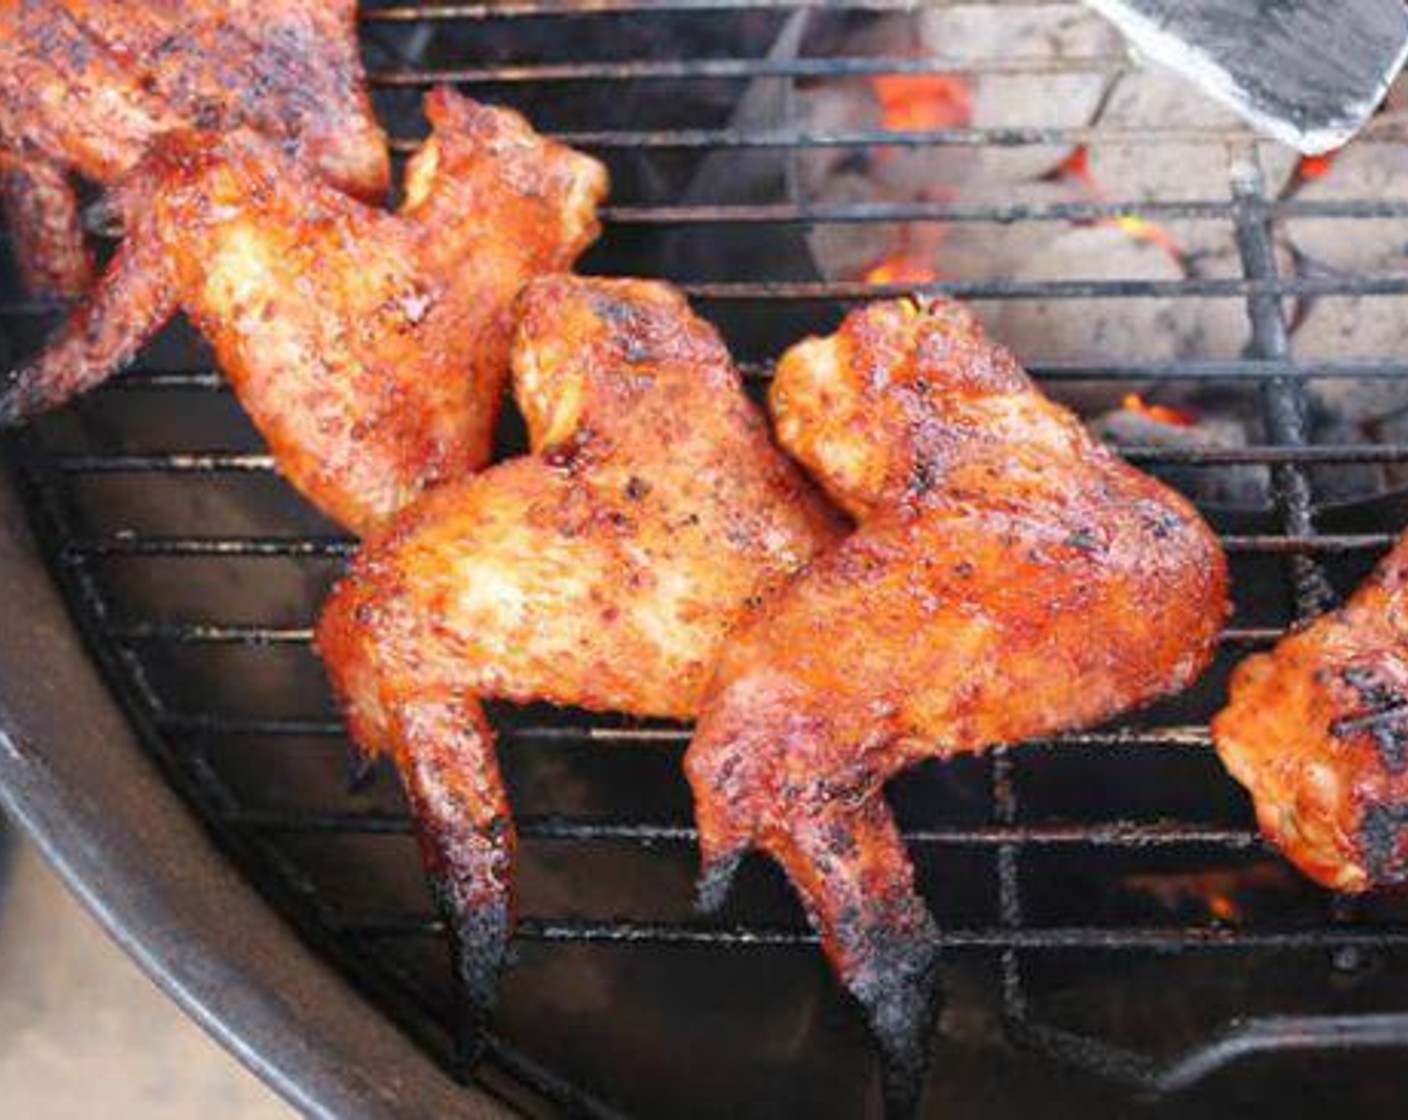 step 6 In a small saucepan over medium heat, melt the Butter (1/2 cup). Add the Hot Sauce (6 fl oz) and Barbecue Sauce (1/4 cup) and reduce heat to simmer while the wings cook.